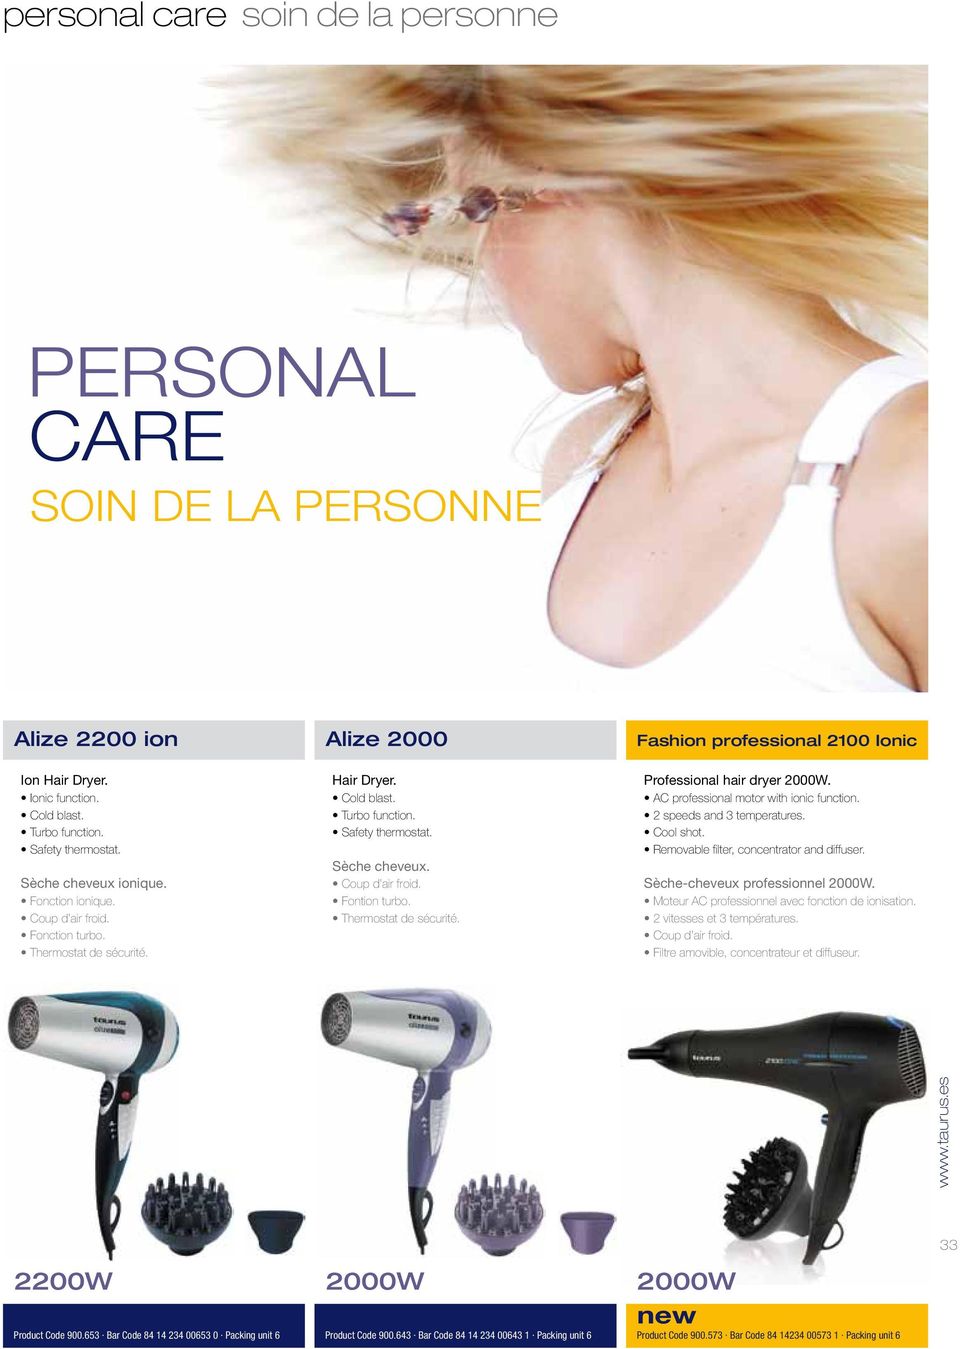 Thermostat de sécurité. Fashion professional 2100 Ionic Professional hair dryer 2000W. AC professional motor with ionic function. 2 speeds and 3 temperatures. Cool shot.